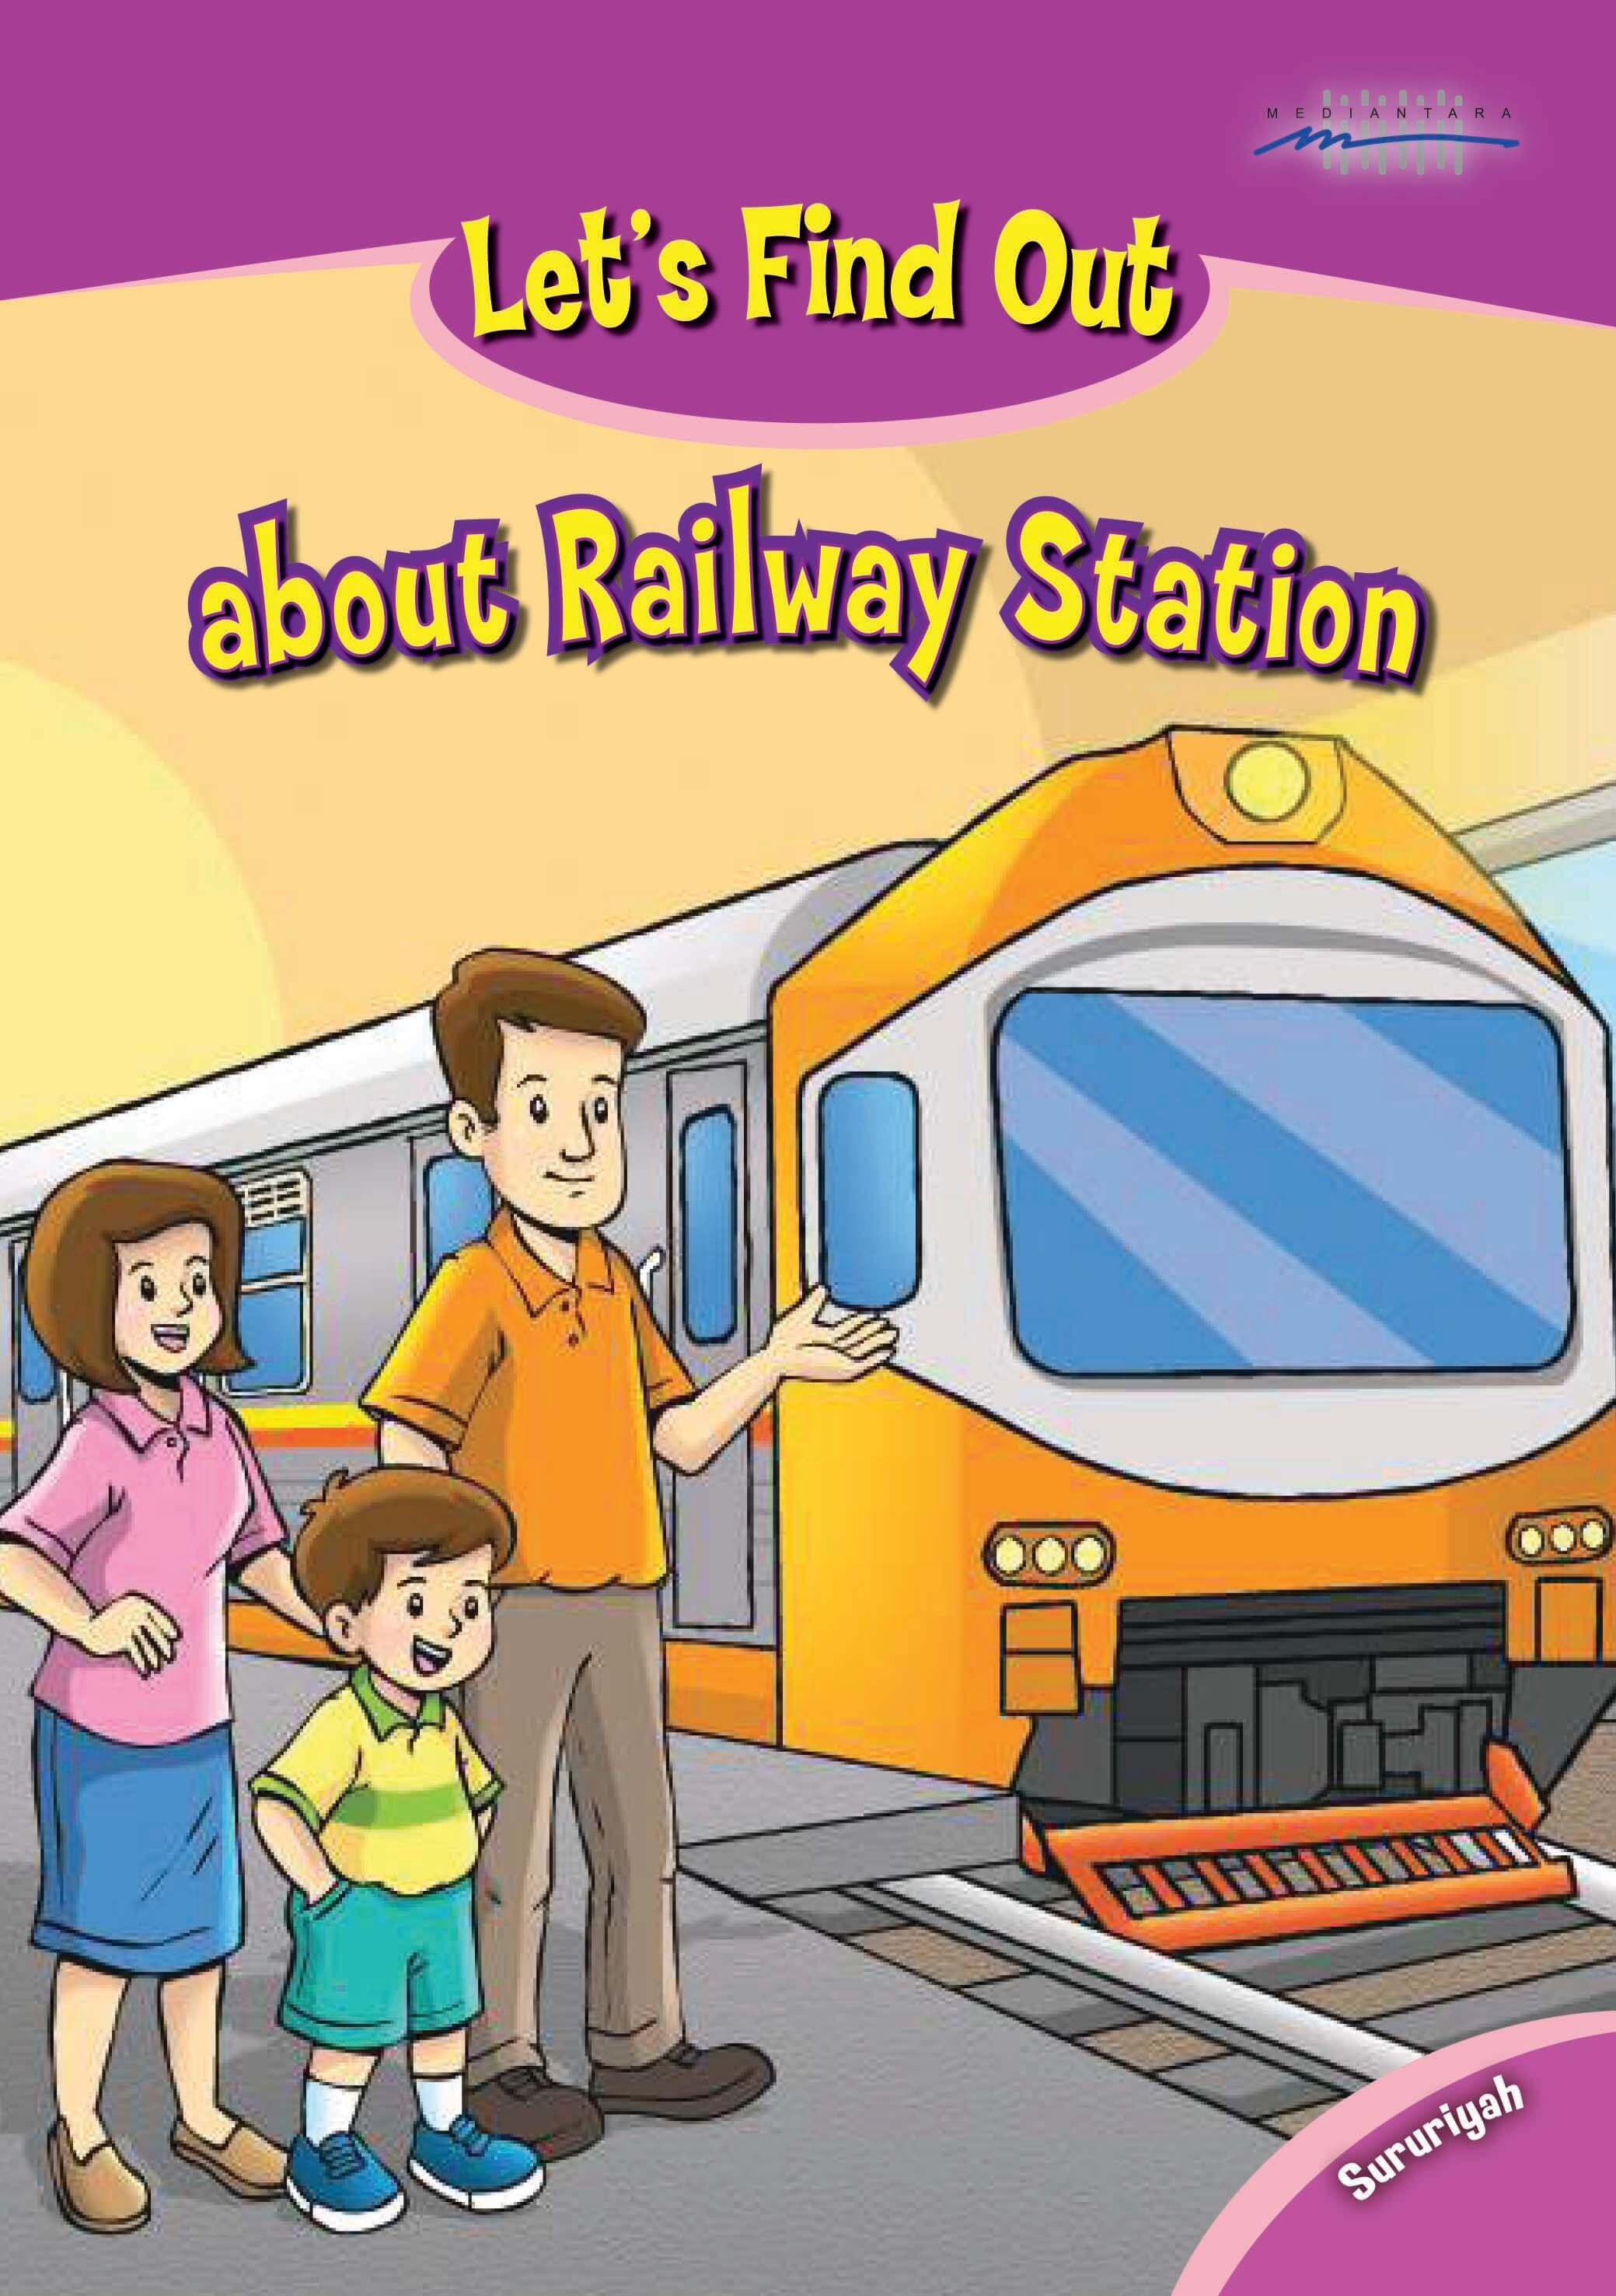 Let's Find Out about Railway Station